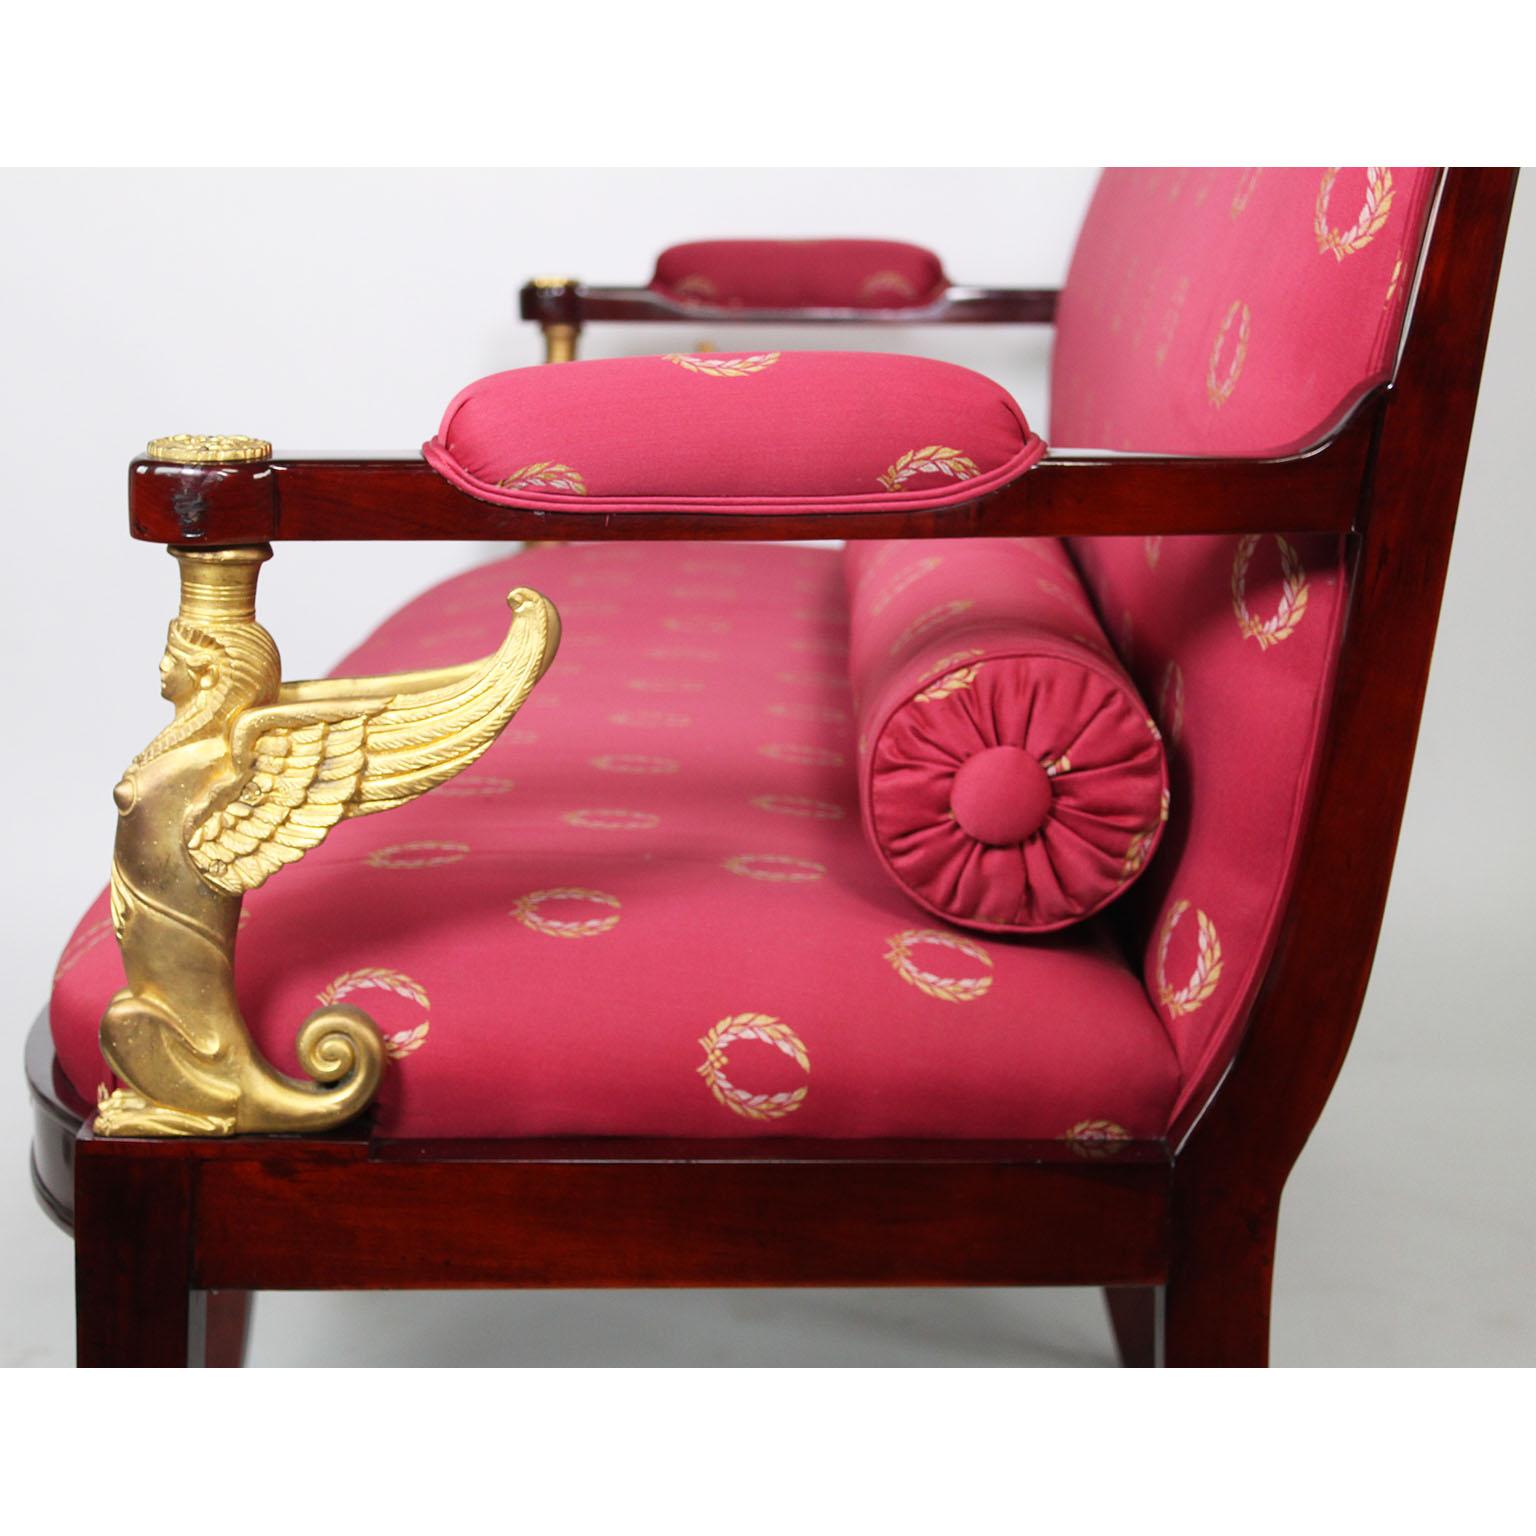  French Empire Revival Style 5 Piece Mahogany & Gilt-Bronze Sphinxes Salon Suite For Sale 2